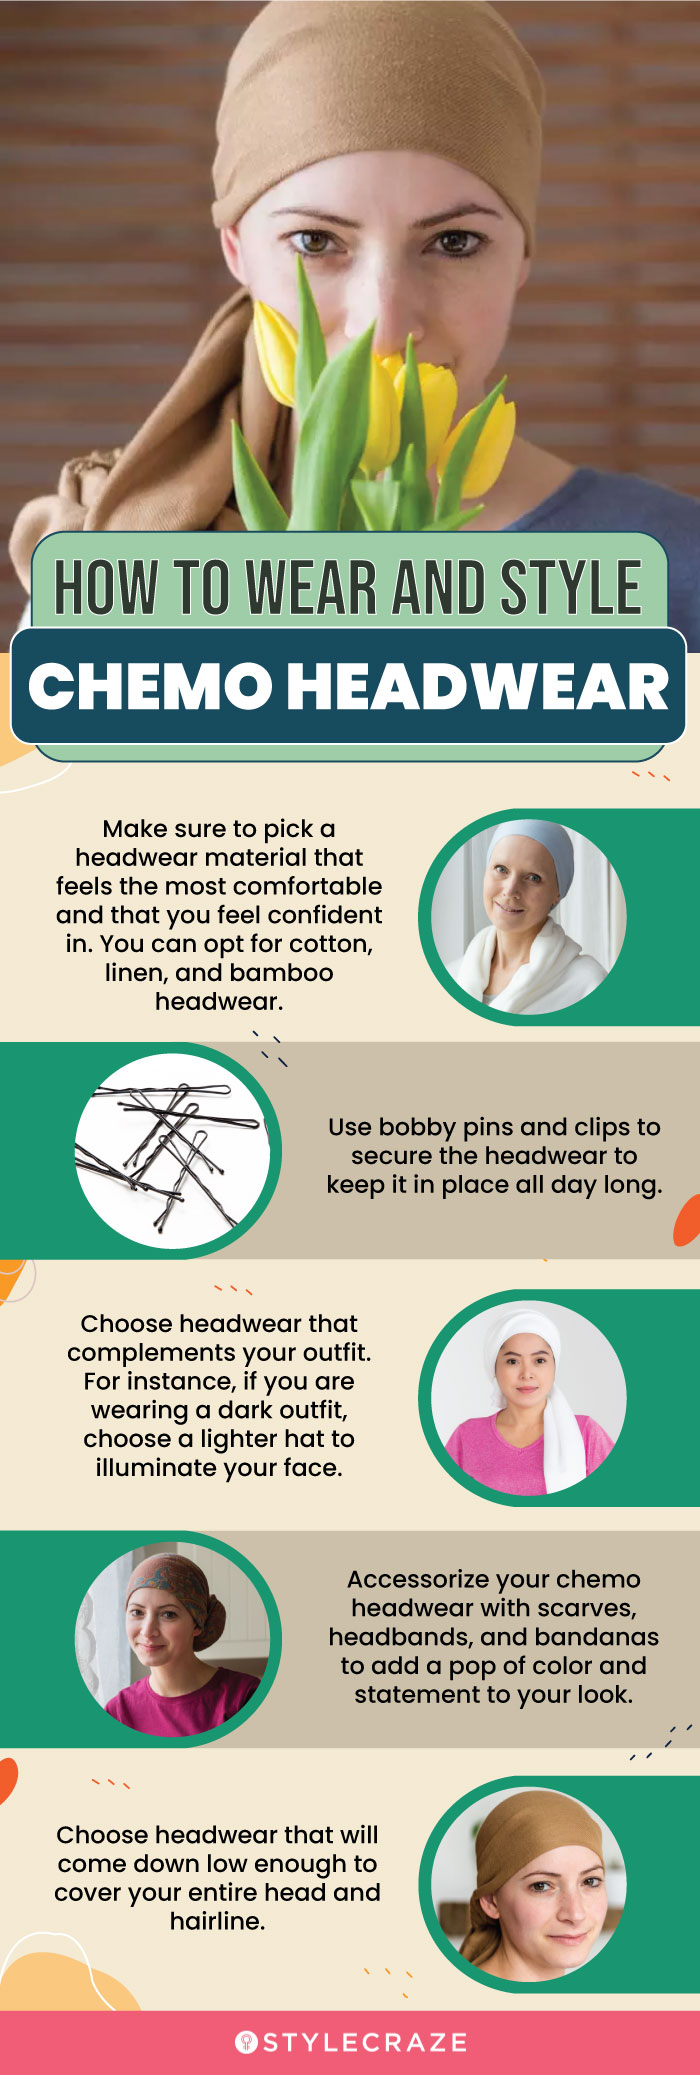 How To Wear And Style Chemo Headwear